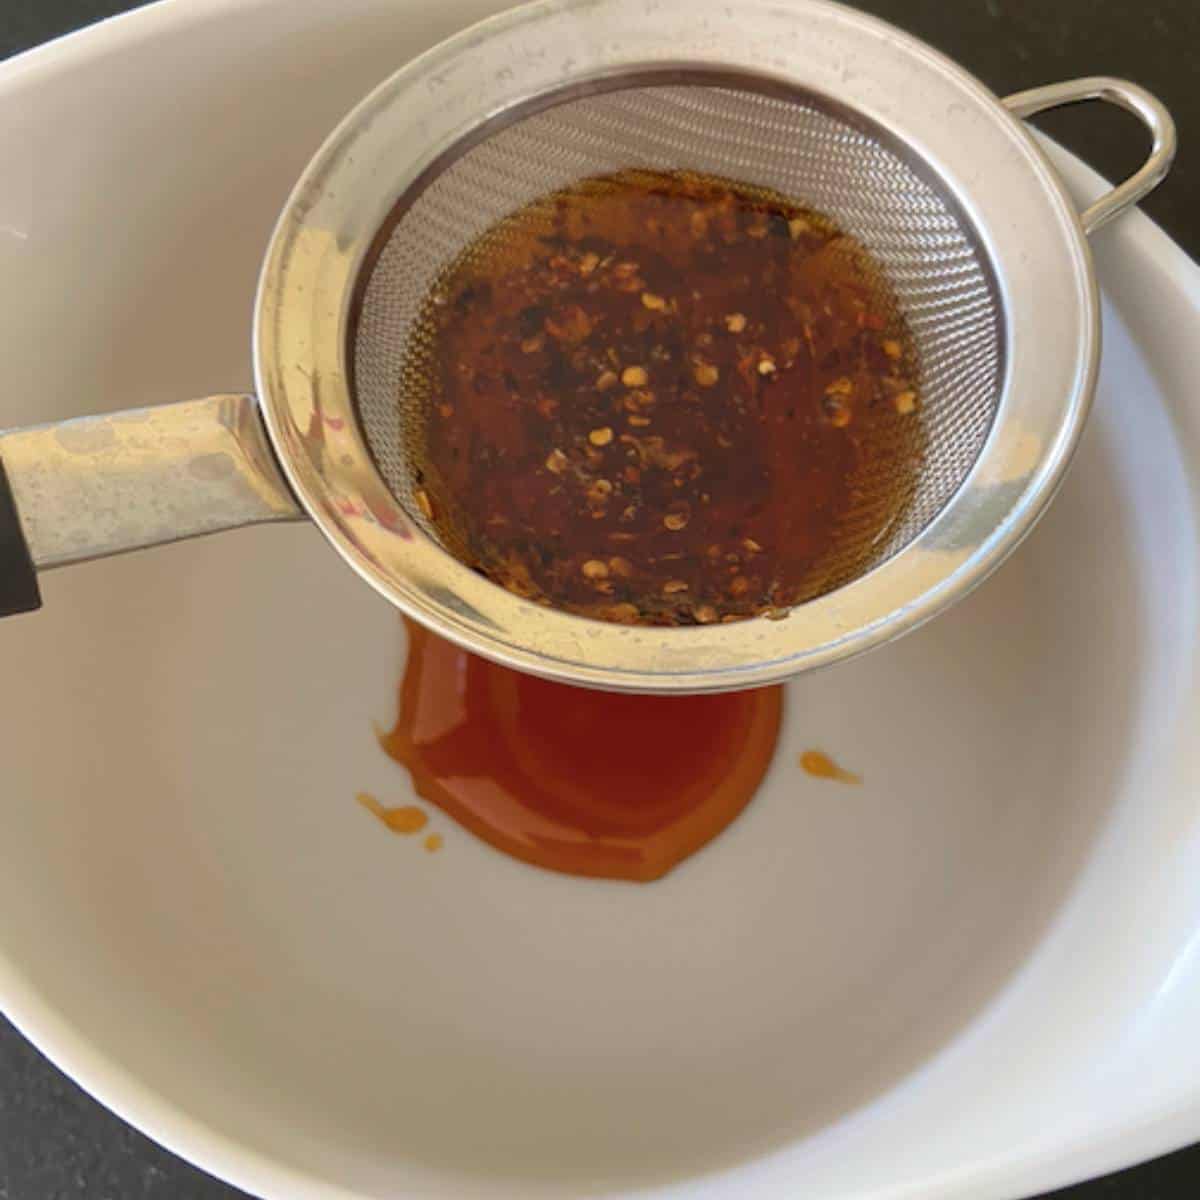 Straining infused honey in strainer with bowl underneath.